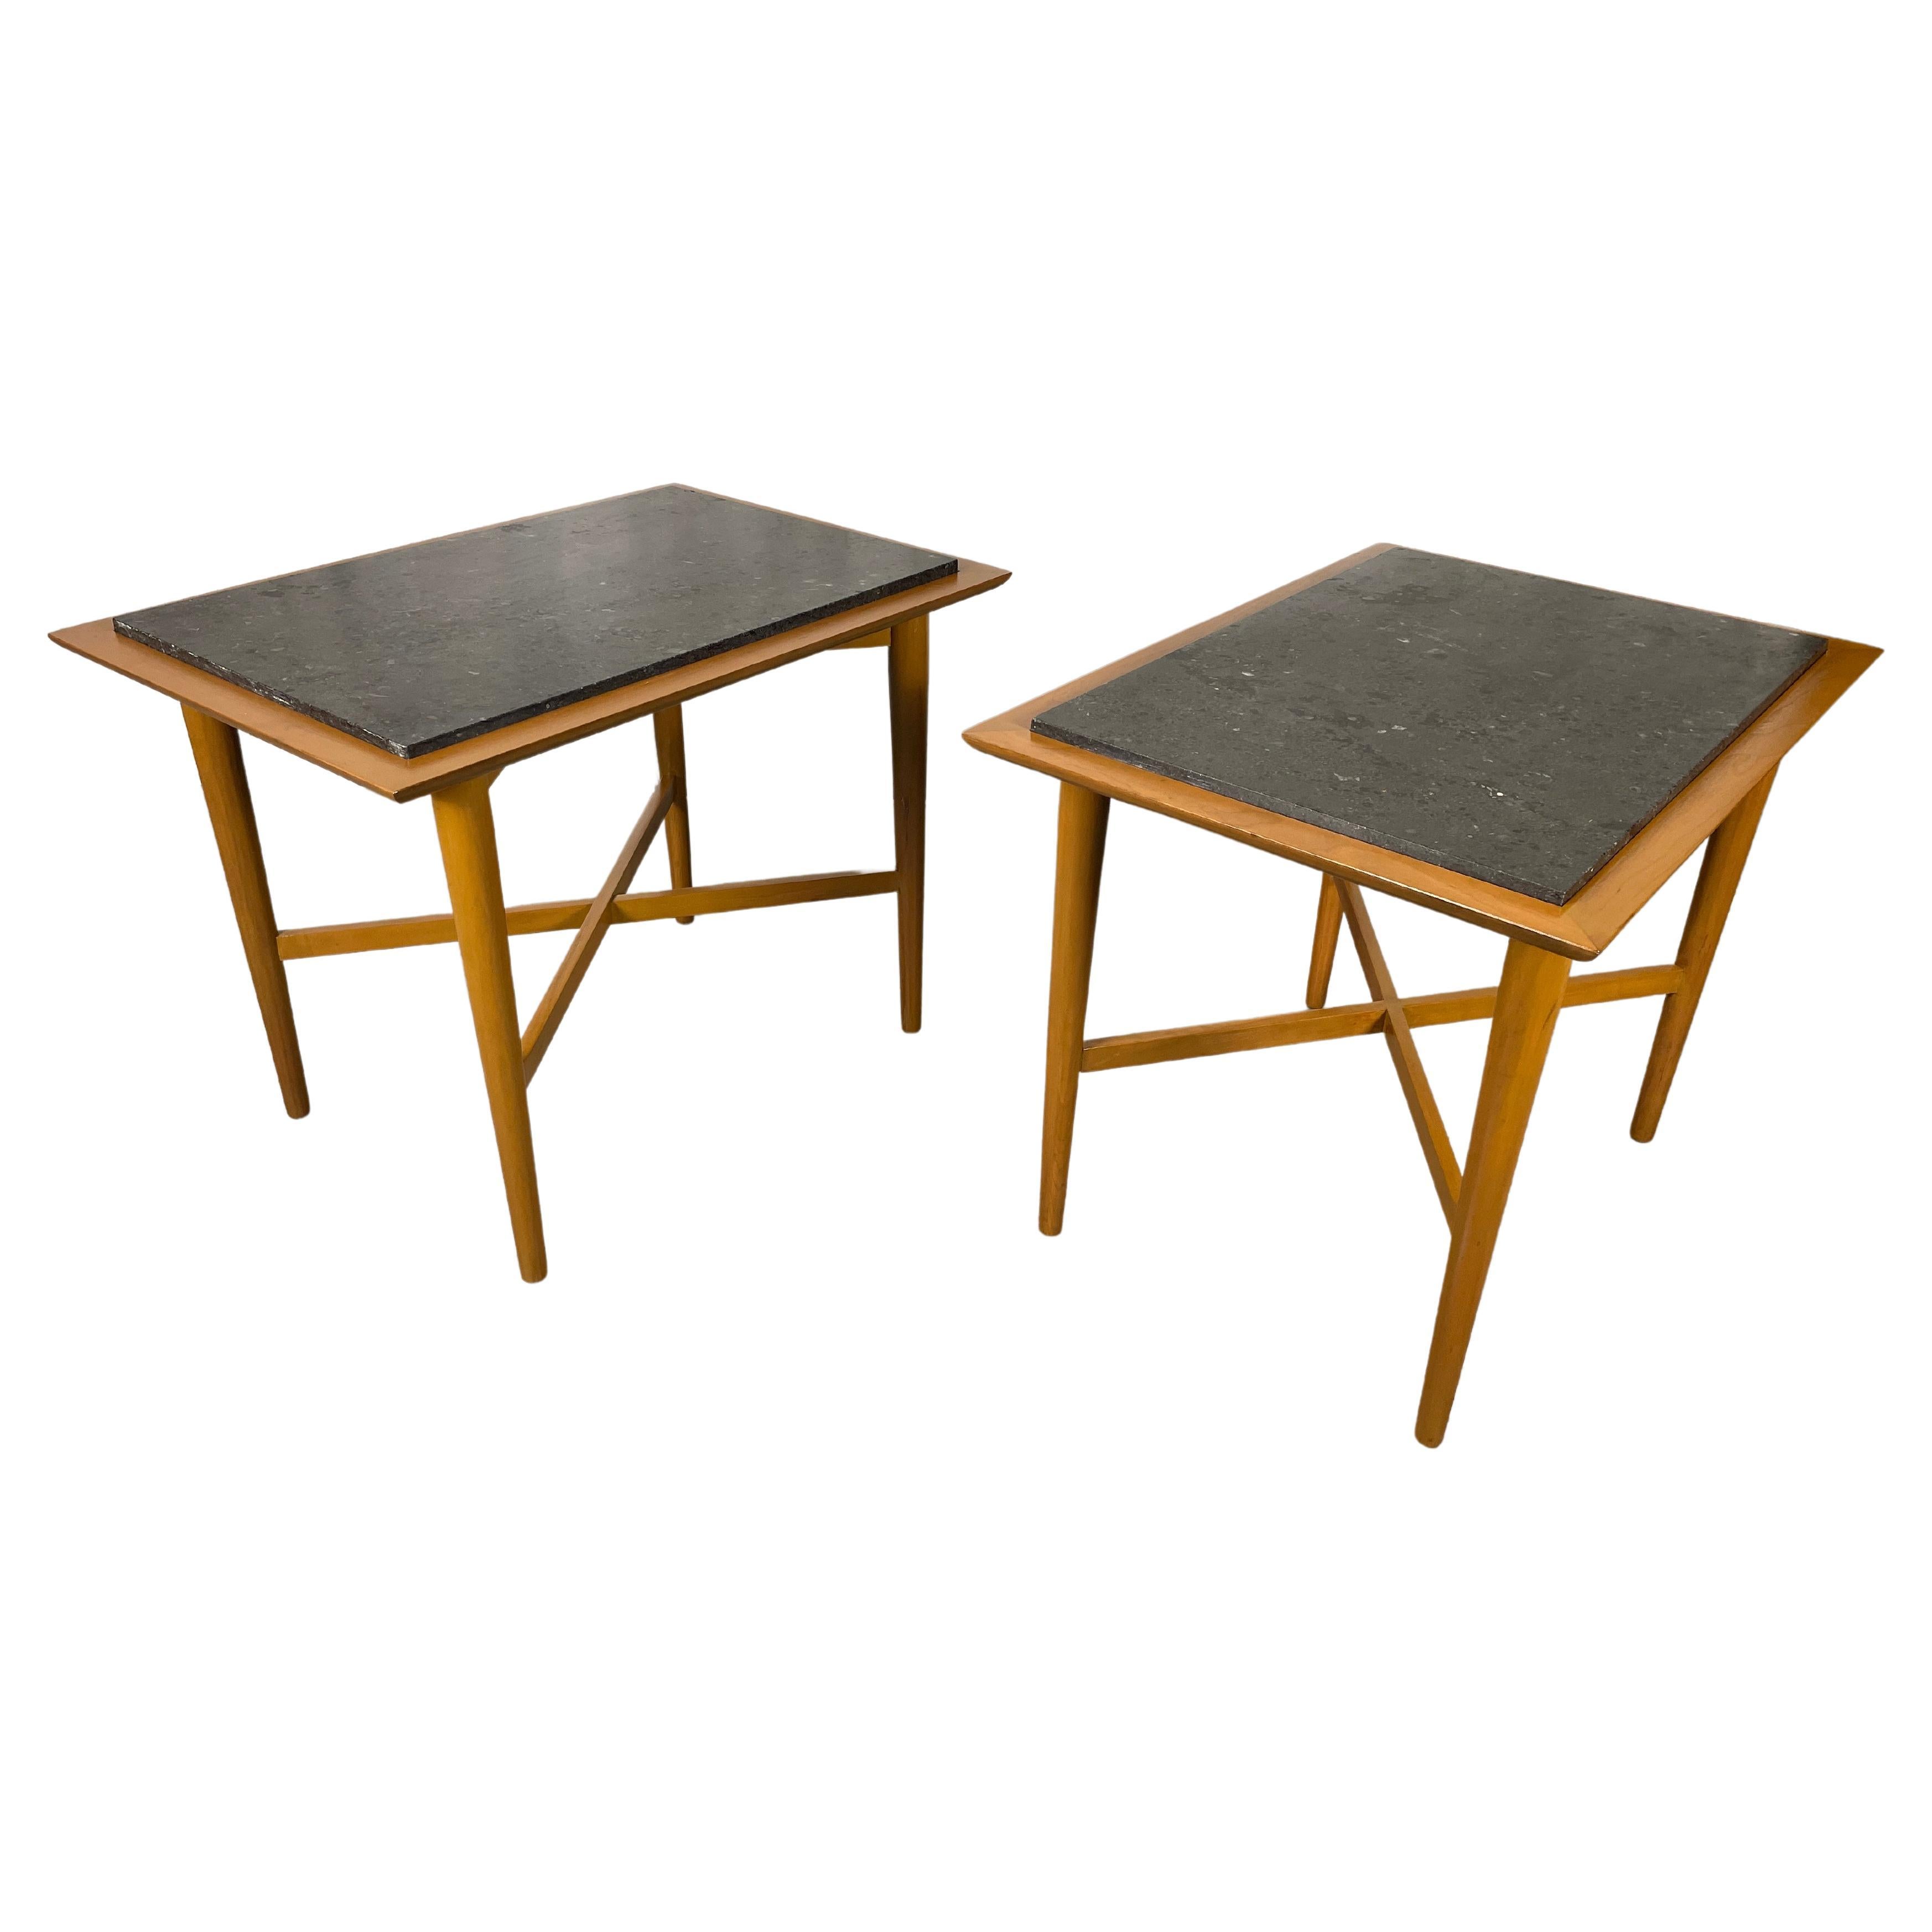 Wooden X Base Granite Top Side Tables For Sale